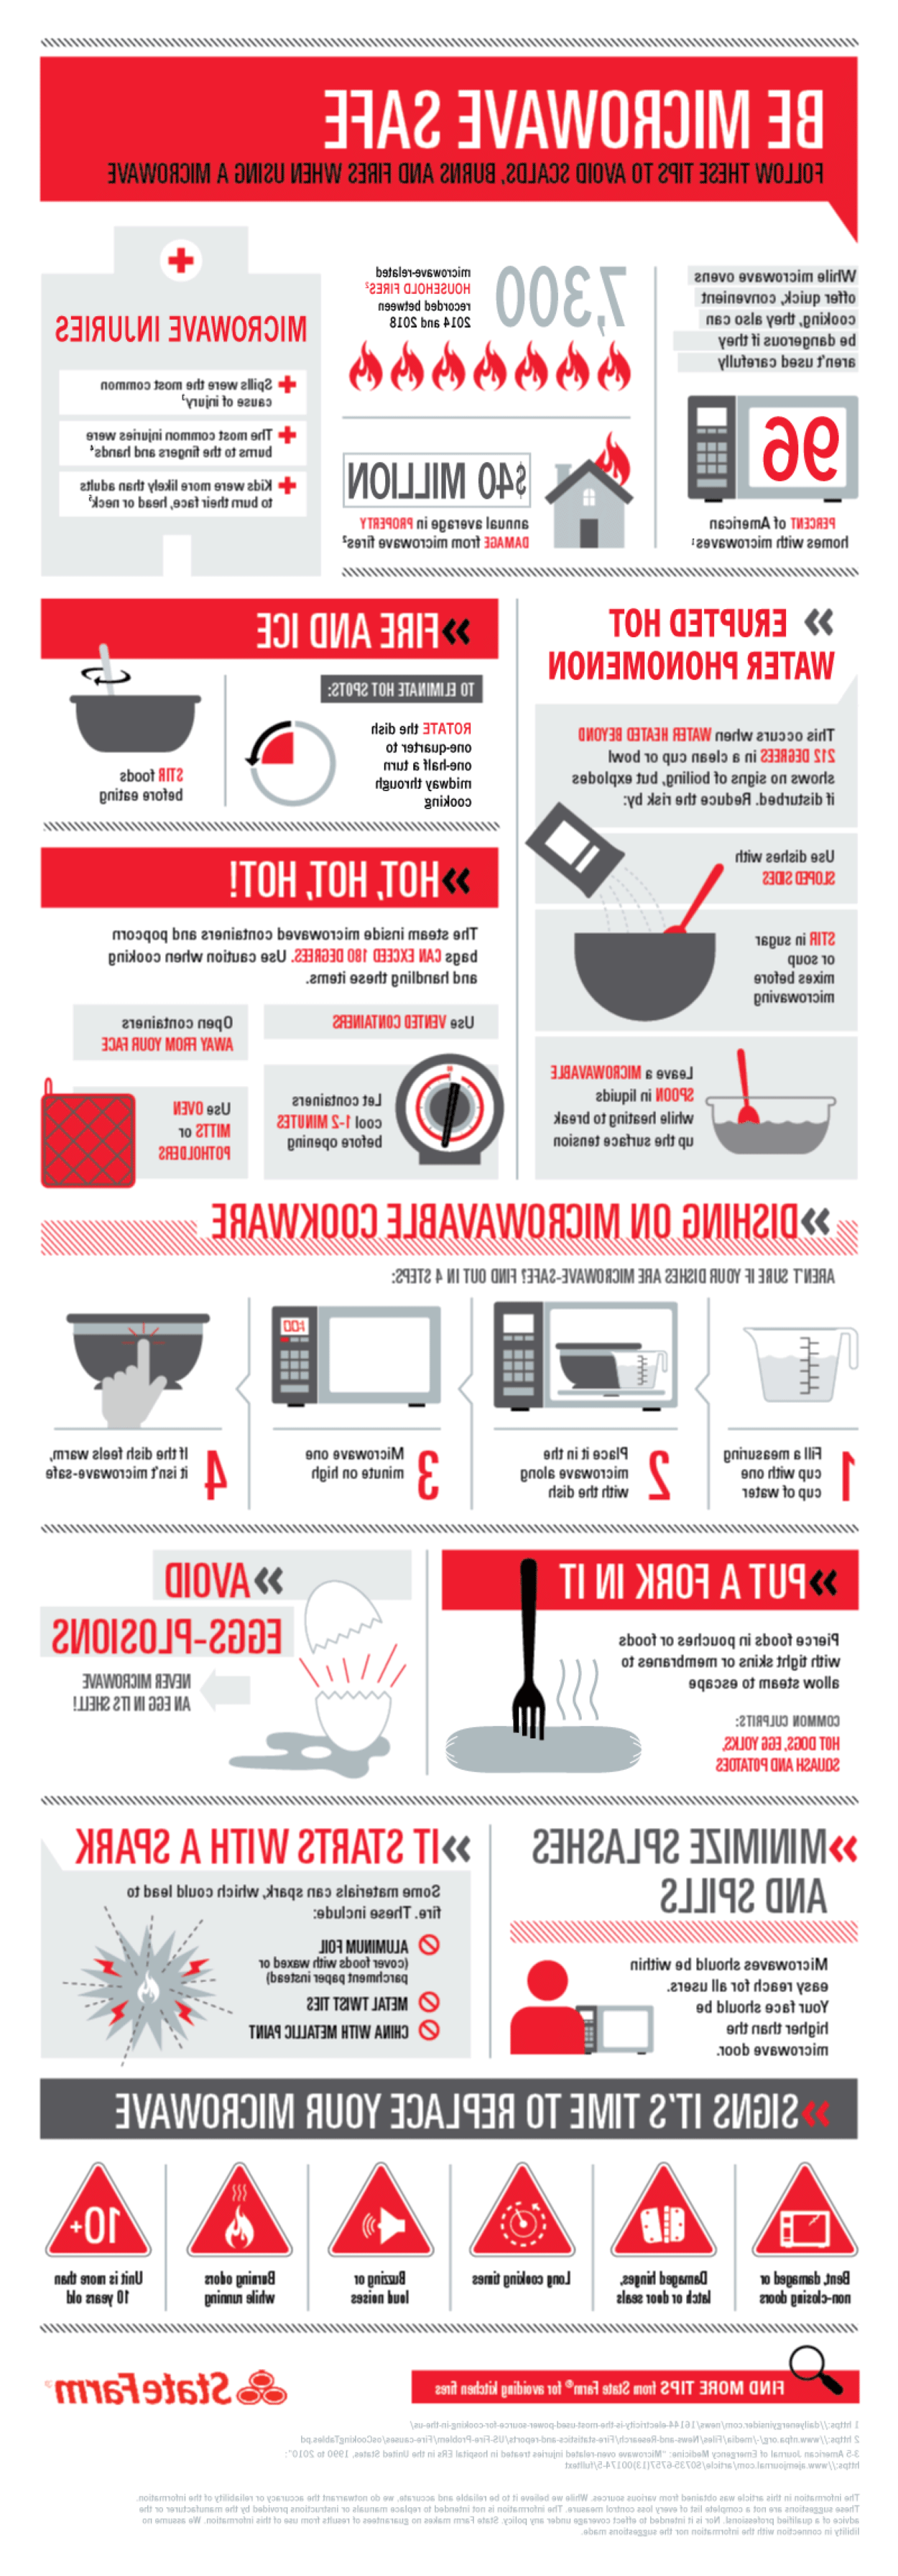 Infographic that shares tips to avoid scalds, burns, and fires when using a microwave.